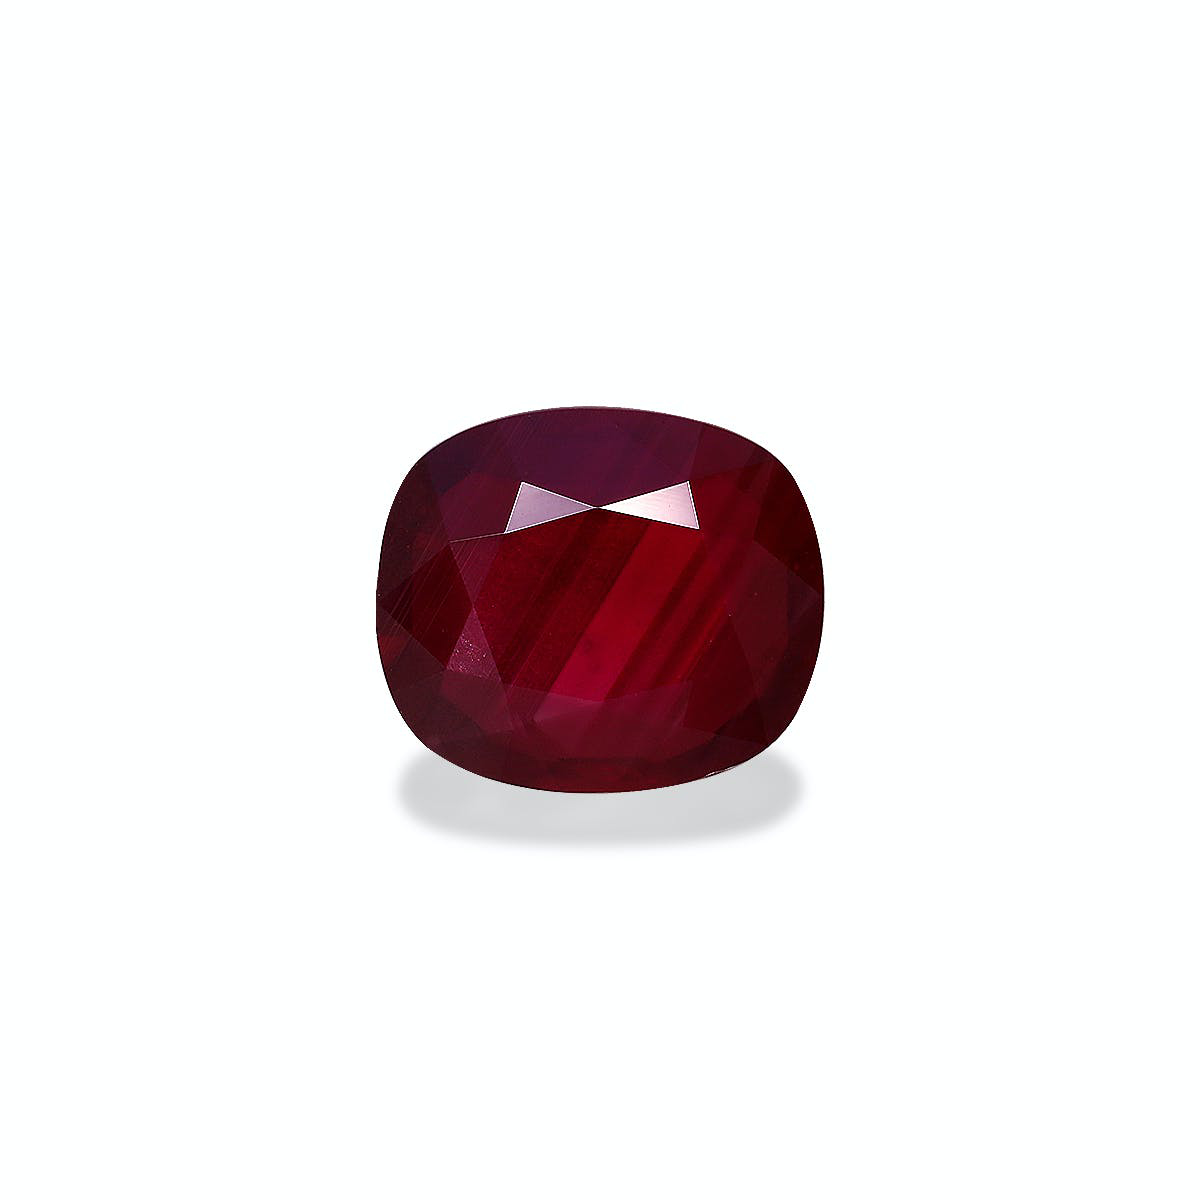 Picture of Unheated Mozambique Ruby 6.02ct - 12x10mm (J2-84)